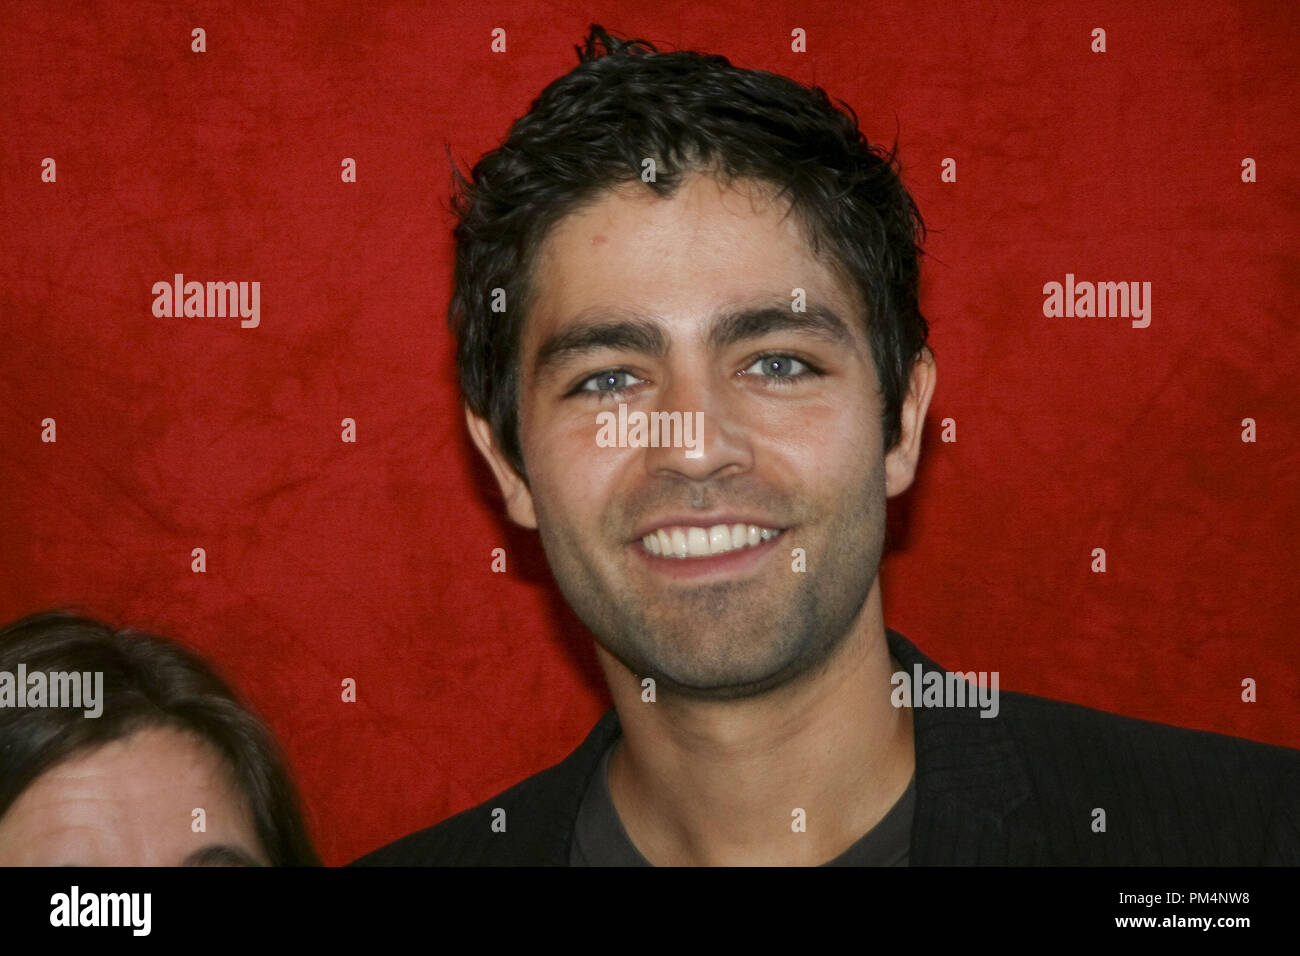 Adrian Grenier 'Teenage Paparazzo' Portrait Session, August 16, 2010.  Reproduction by American tabloids is absolutely forbidden. File Reference # 30445 012JRC  For Editorial Use Only -  All Rights Reserved Stock Photo